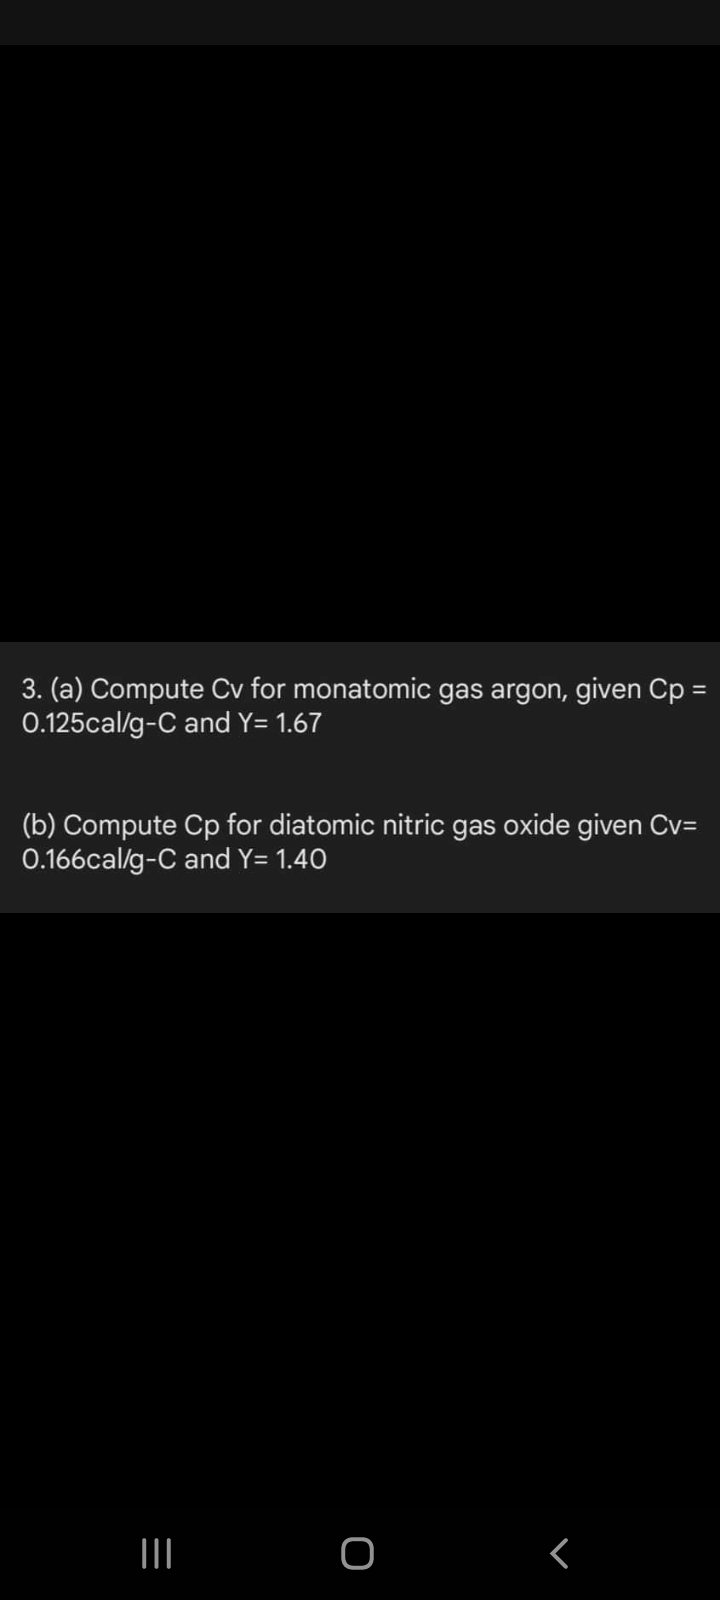 3. (a) Compute Cv for monatomic gas argon, given Cp =
0.125cal/g-C and Y= 1.67
(b) Compute Cp for diatomic nitric gas oxide given Cv=
0.166cal/g-C and Y= 1.40
III O
